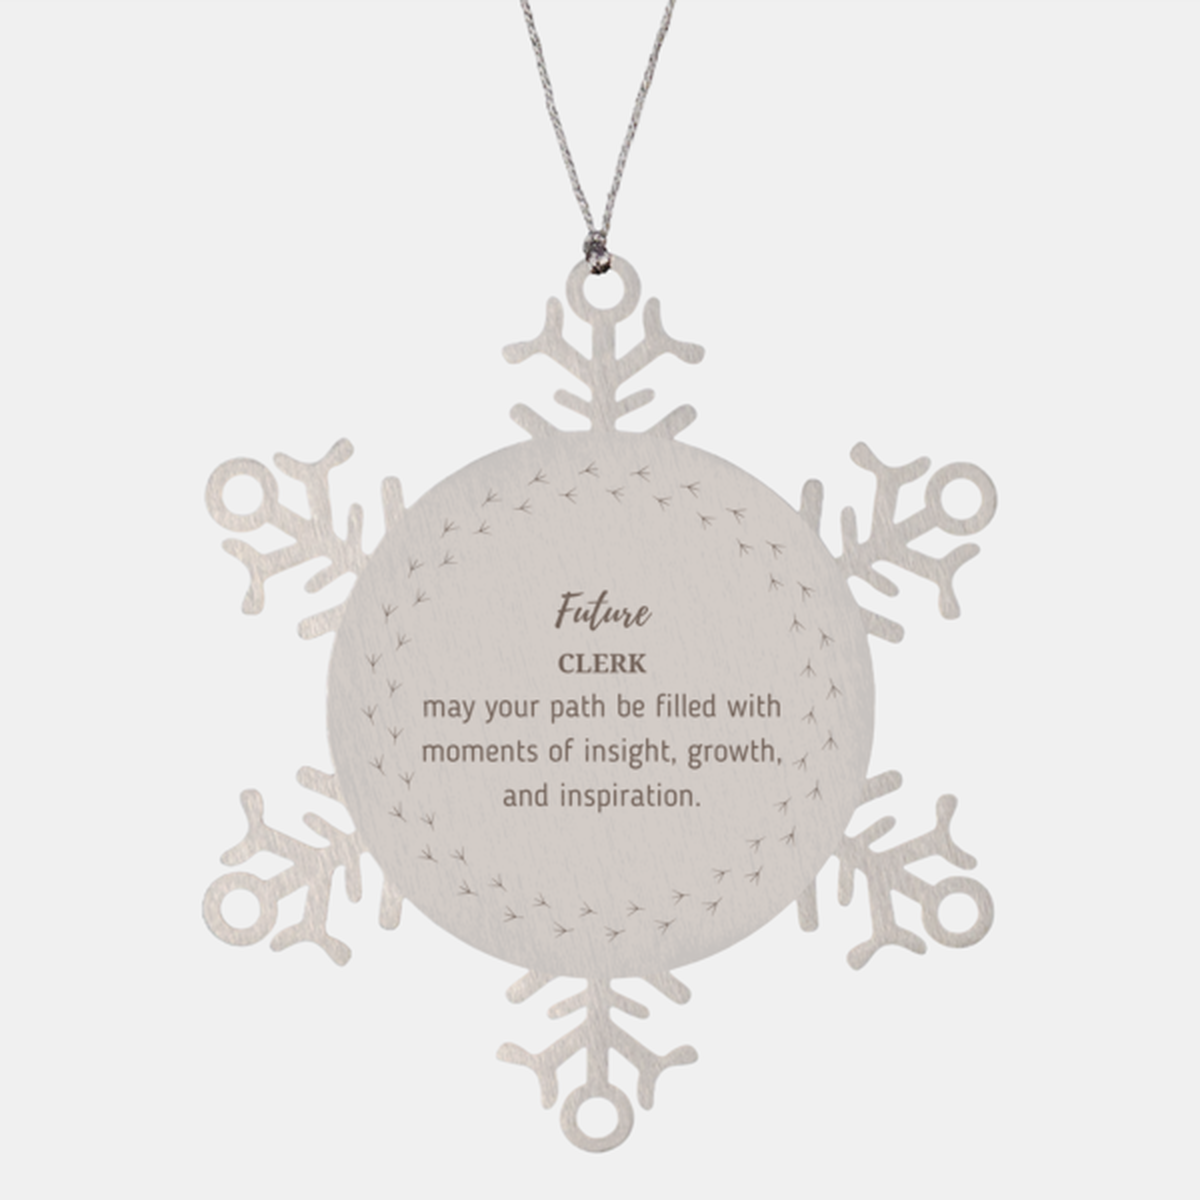 Future Clerk Gifts, May your path be filled with moments of insight, Graduation Gifts for New Clerk, Christmas Unique Snowflake Ornament For Men, Women, Friends